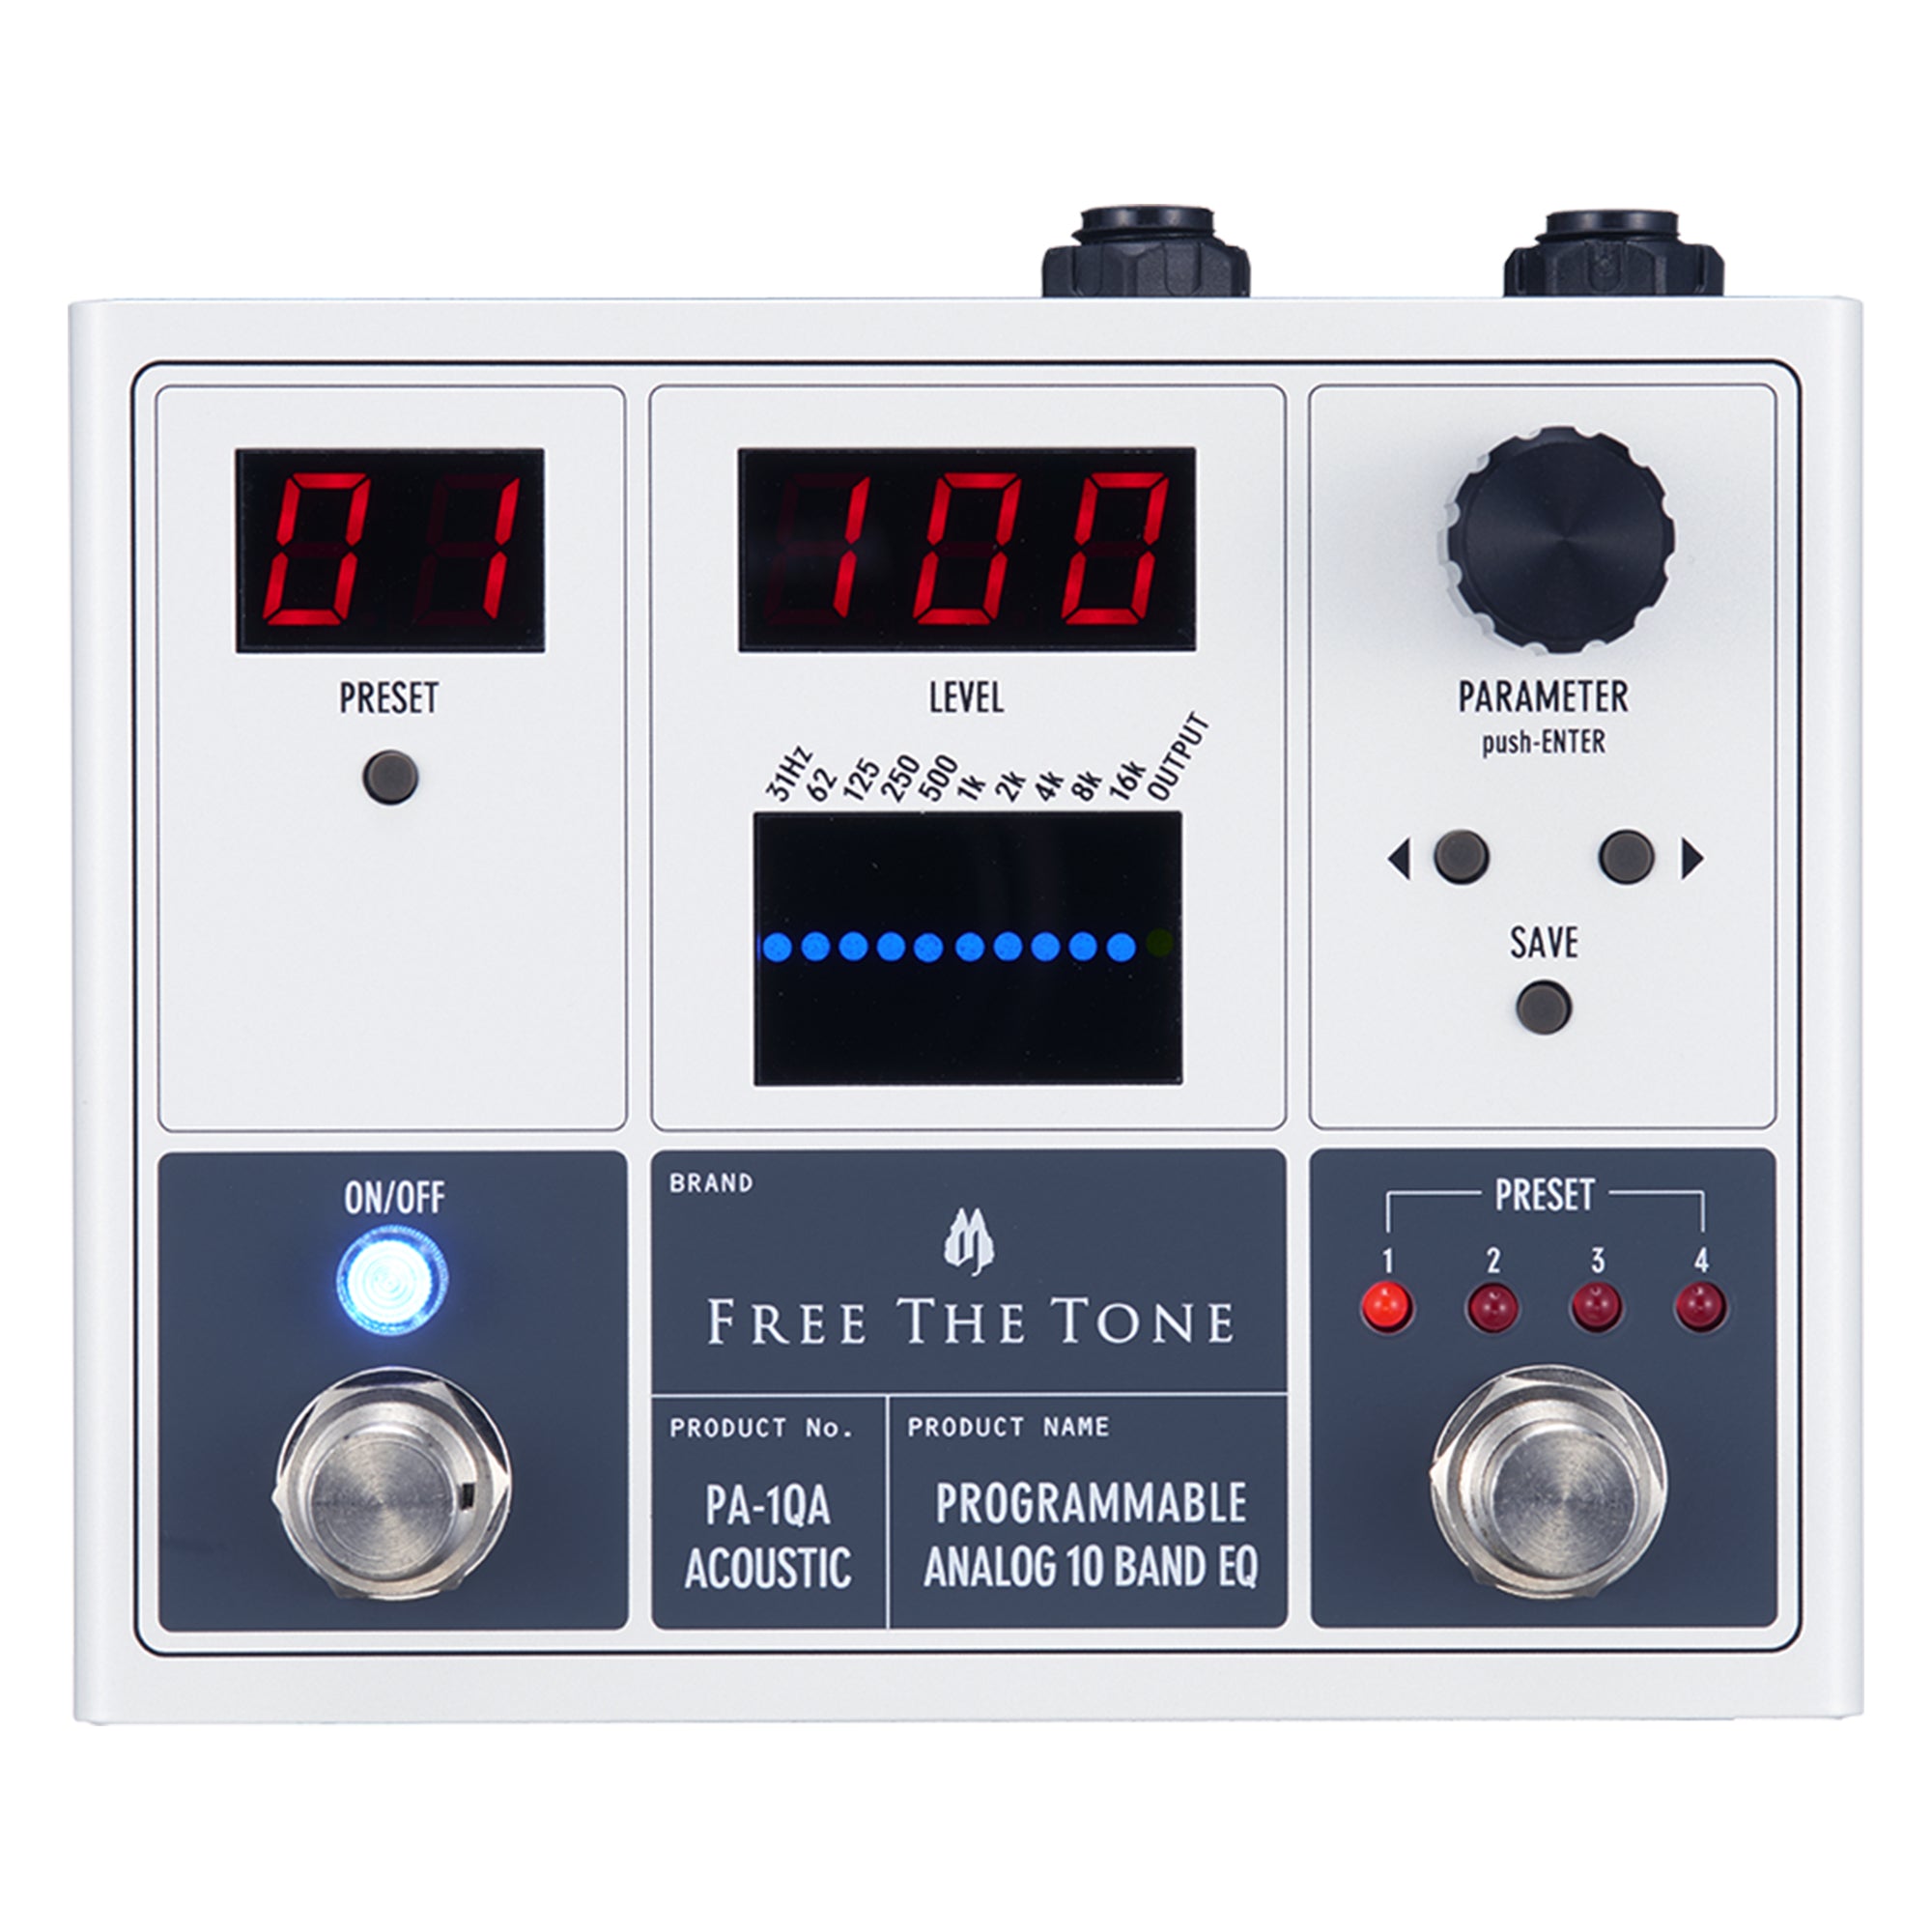 Free The Tone Programmable Analog 10 band EQ for Acoustic Guitar PA-1QA